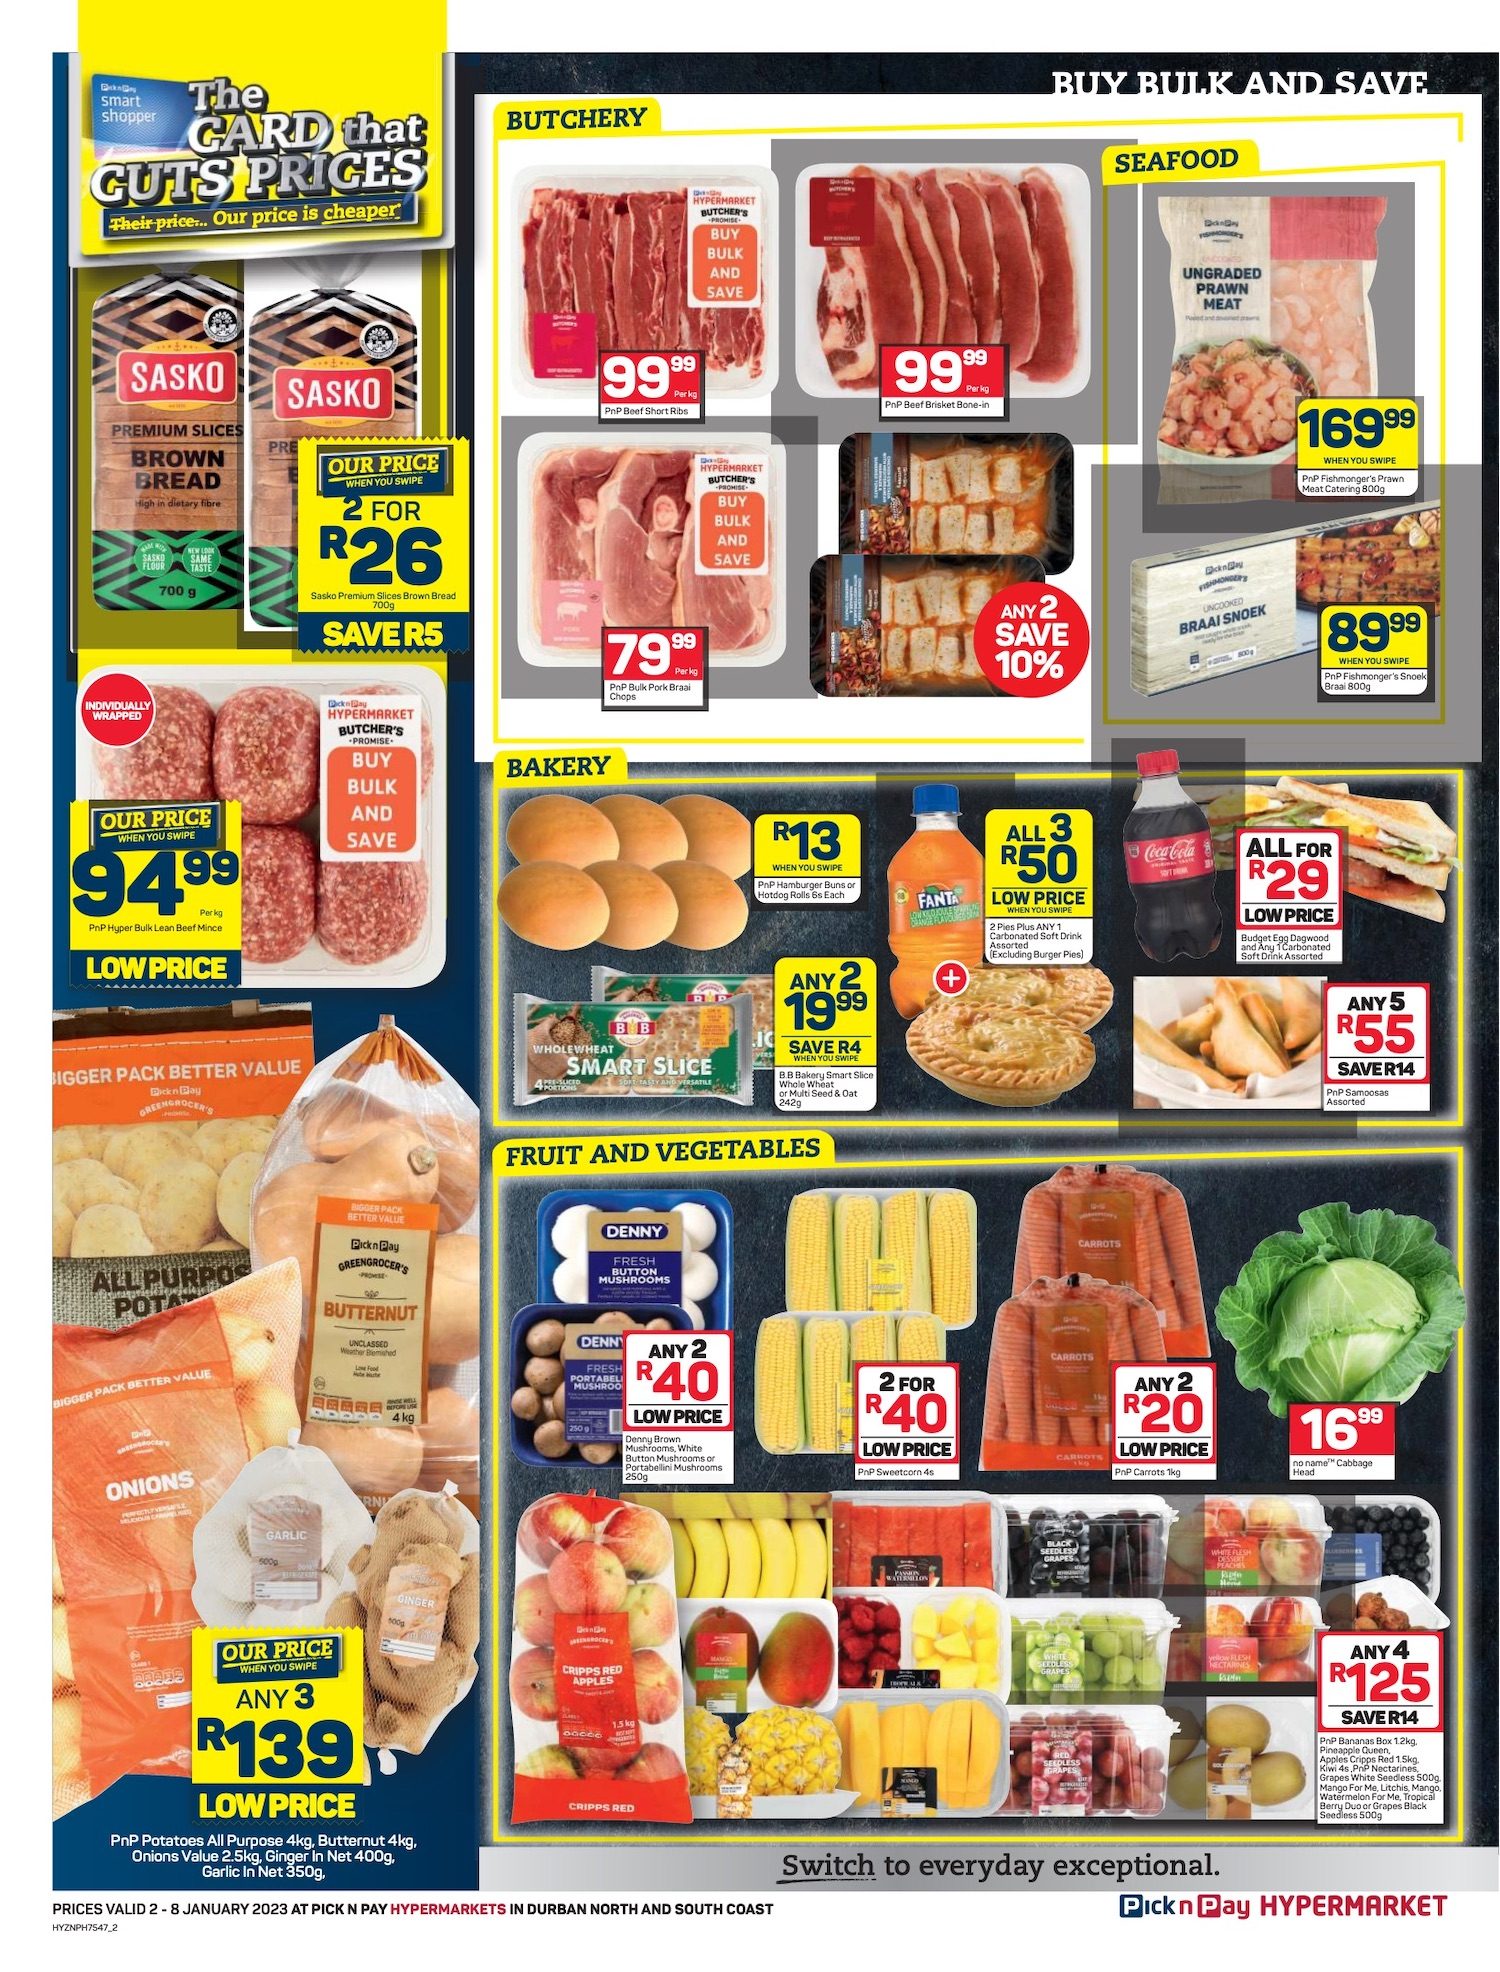 Pnp Hyper Specials 2 Jan 2023 Pick n Pay Catalogue Pick n Pay